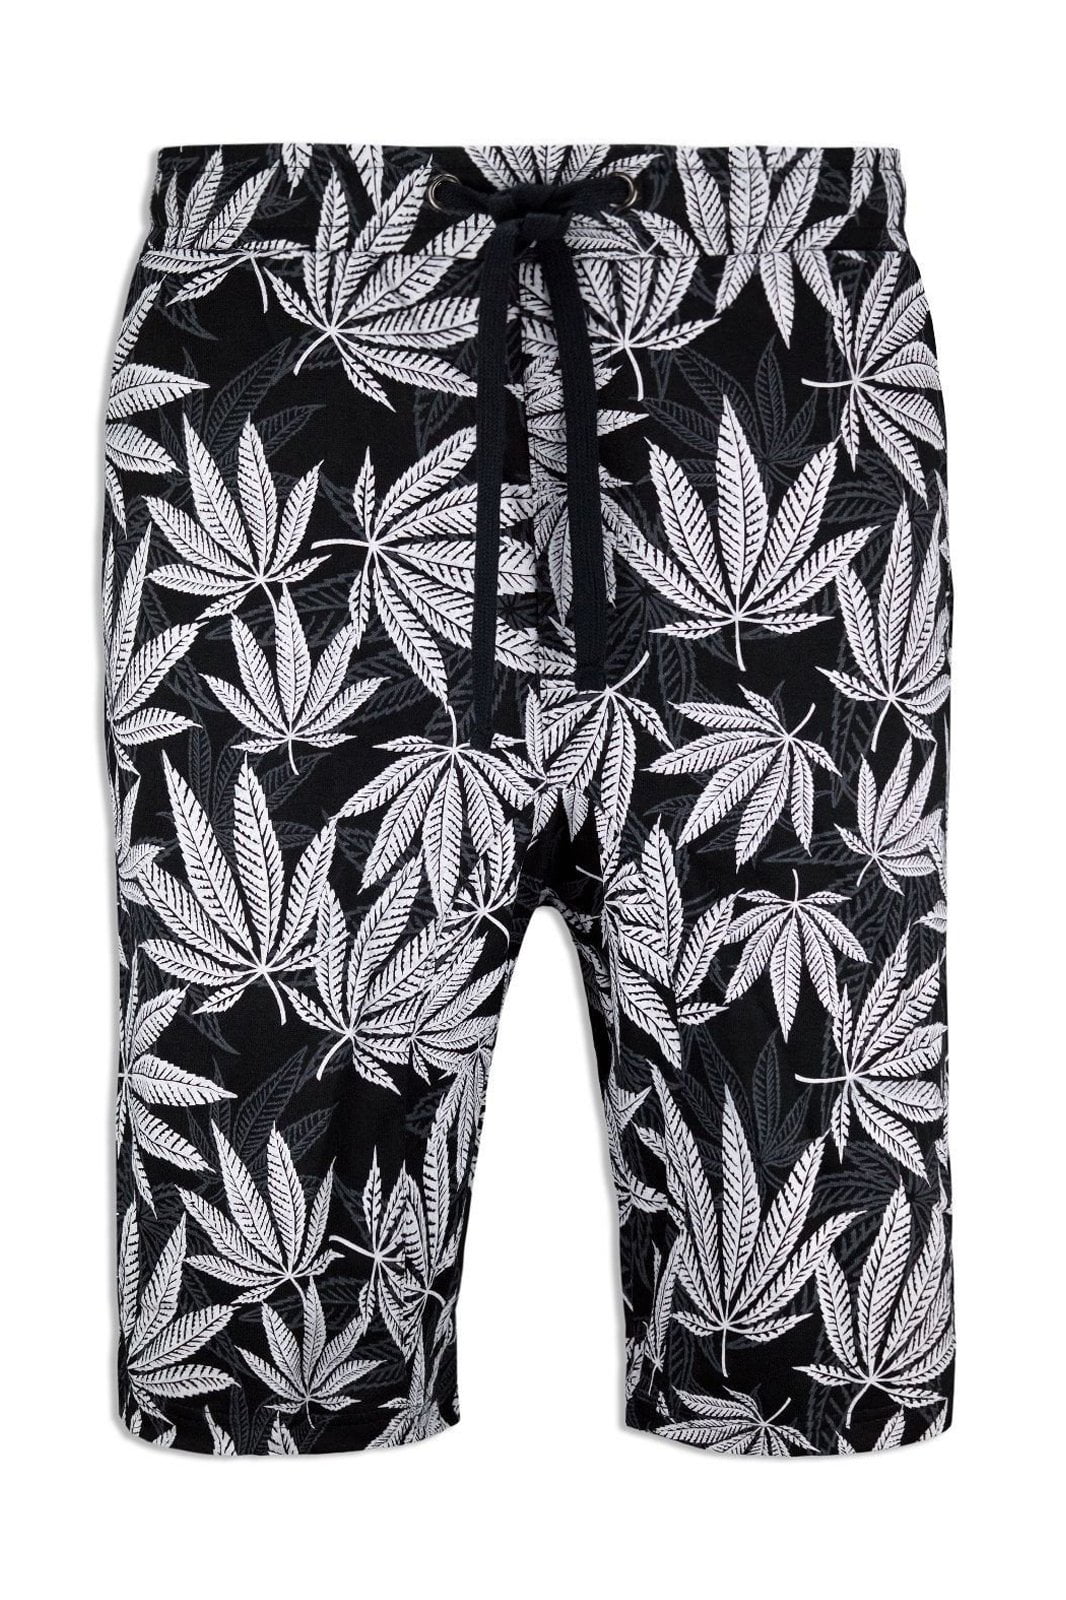 Pot Weed Leaf Pattern Mens Beach Board Shorts Swim Trunks Casual Gym Home Pants with Pocket